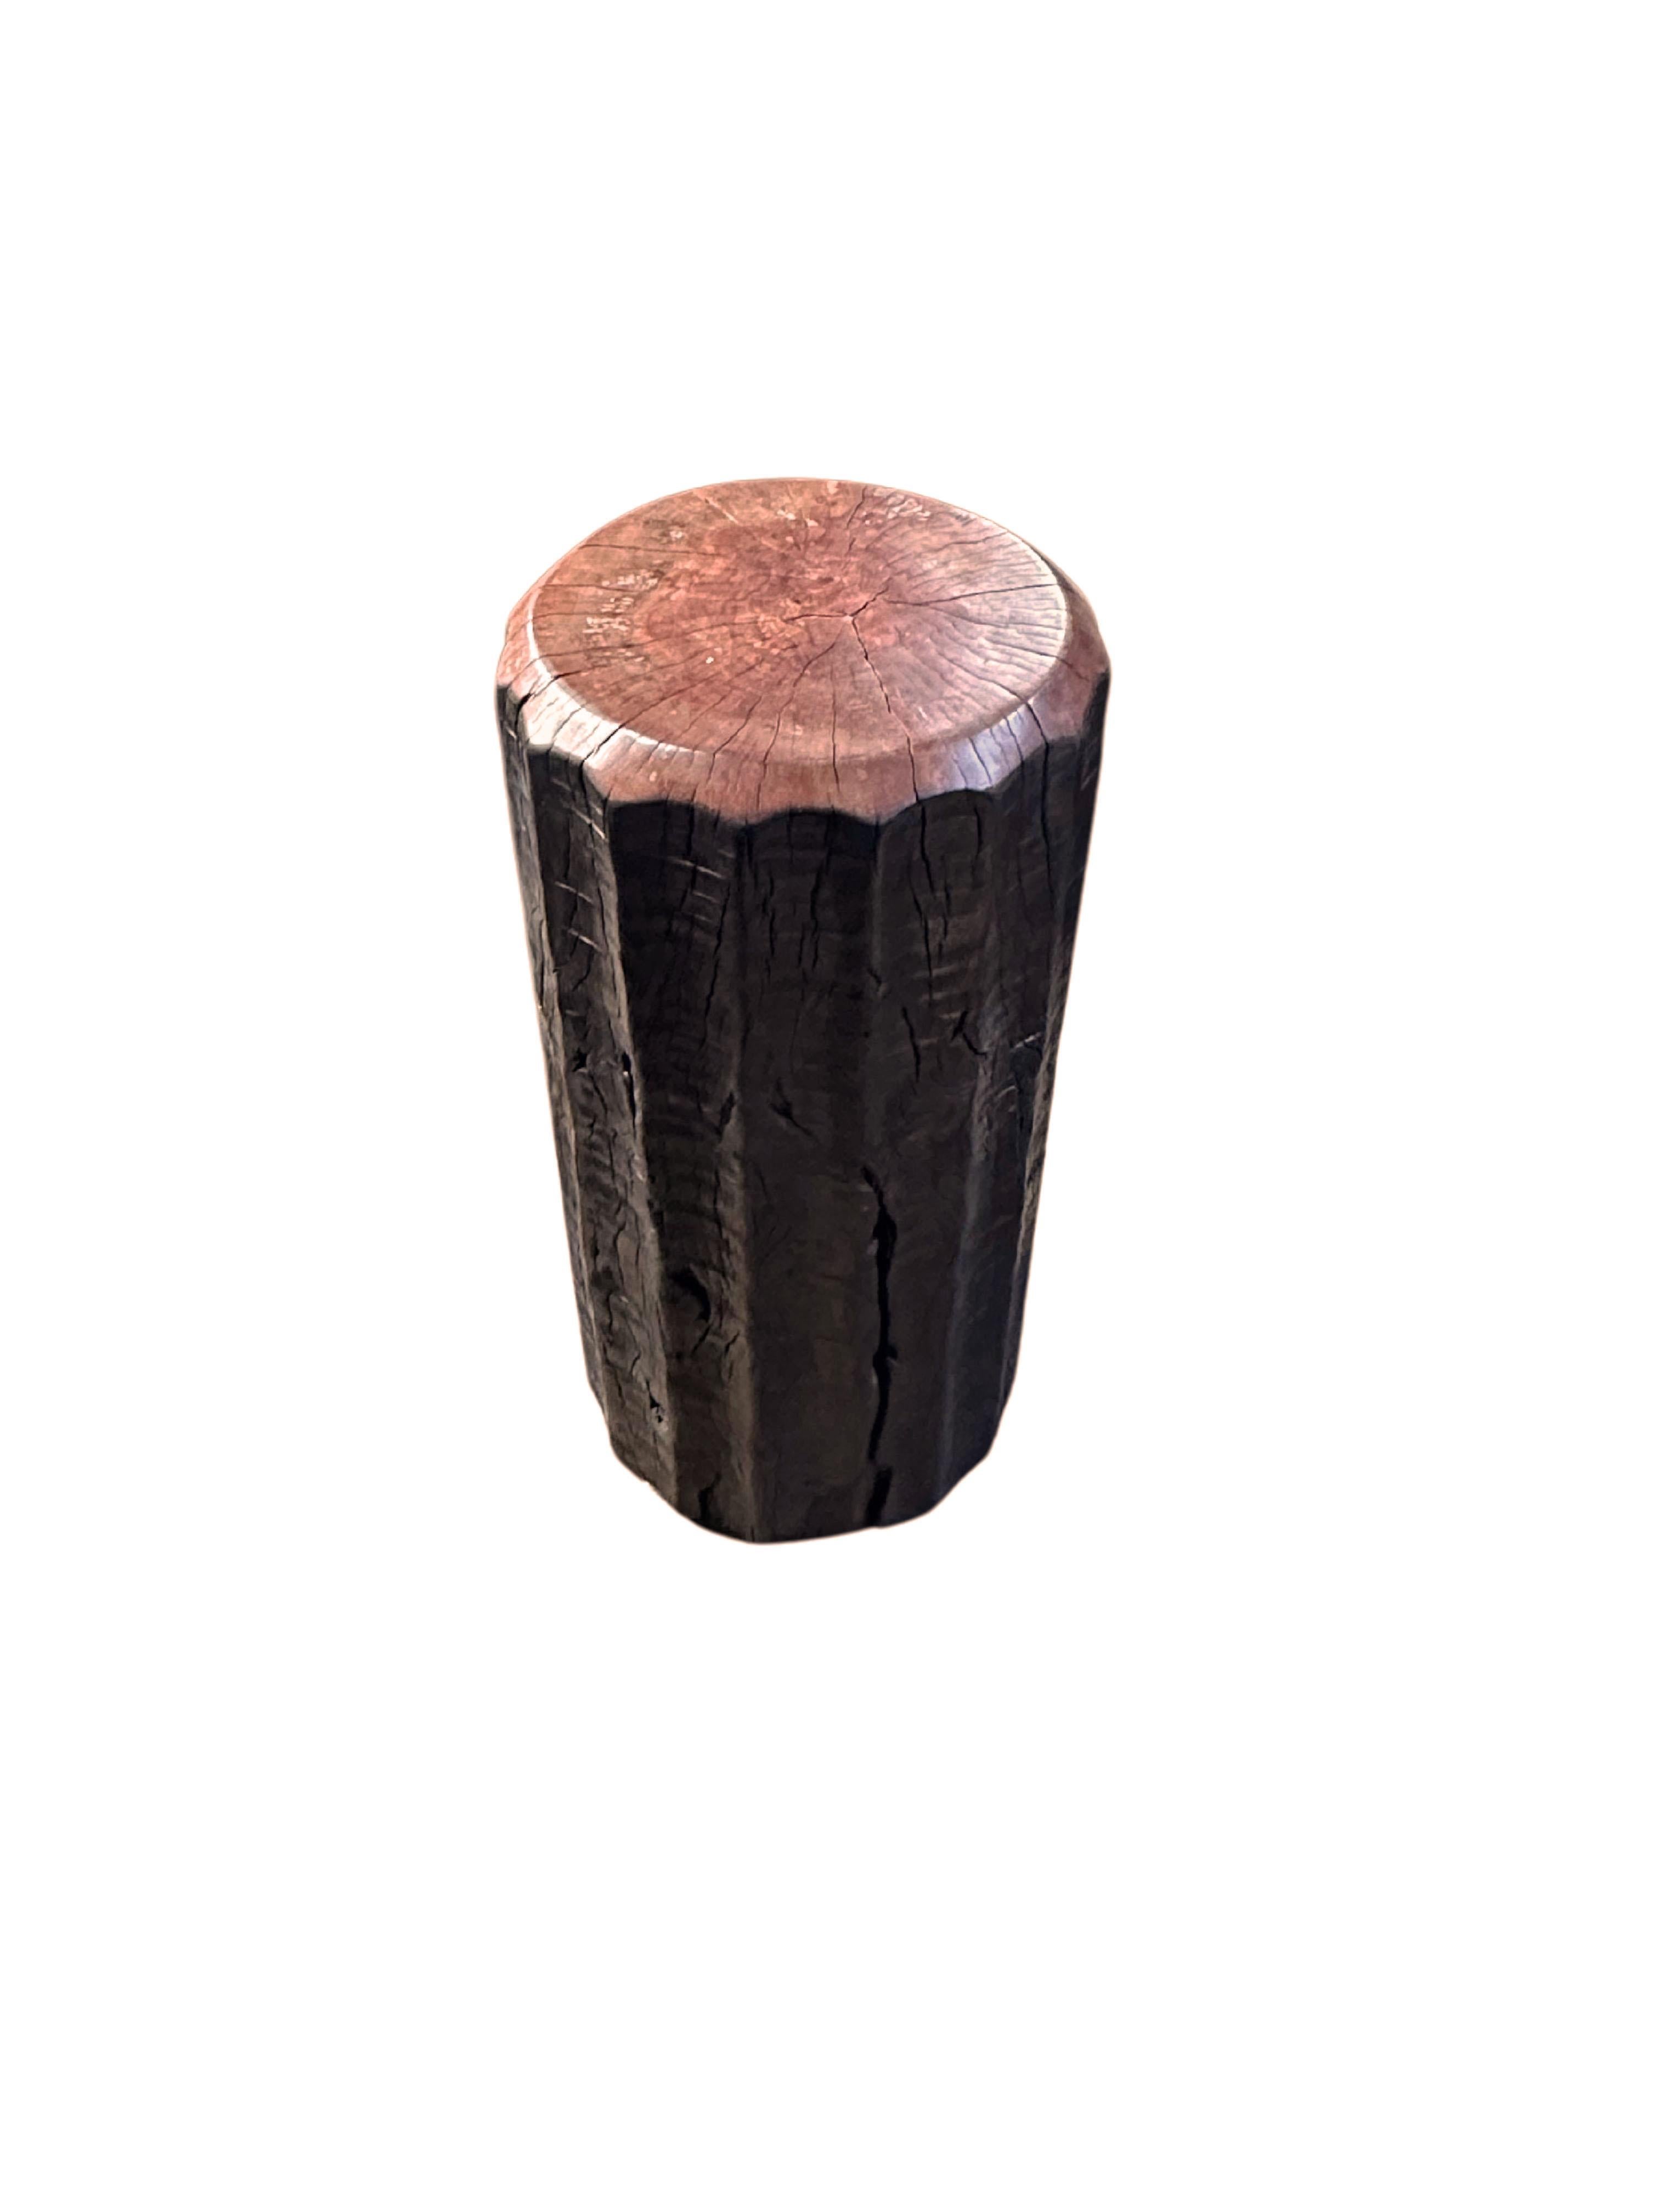 Organic Modern Solid Lychee Wood Side Table Stunning Textures, Ribbed Detailing Modern Organic For Sale